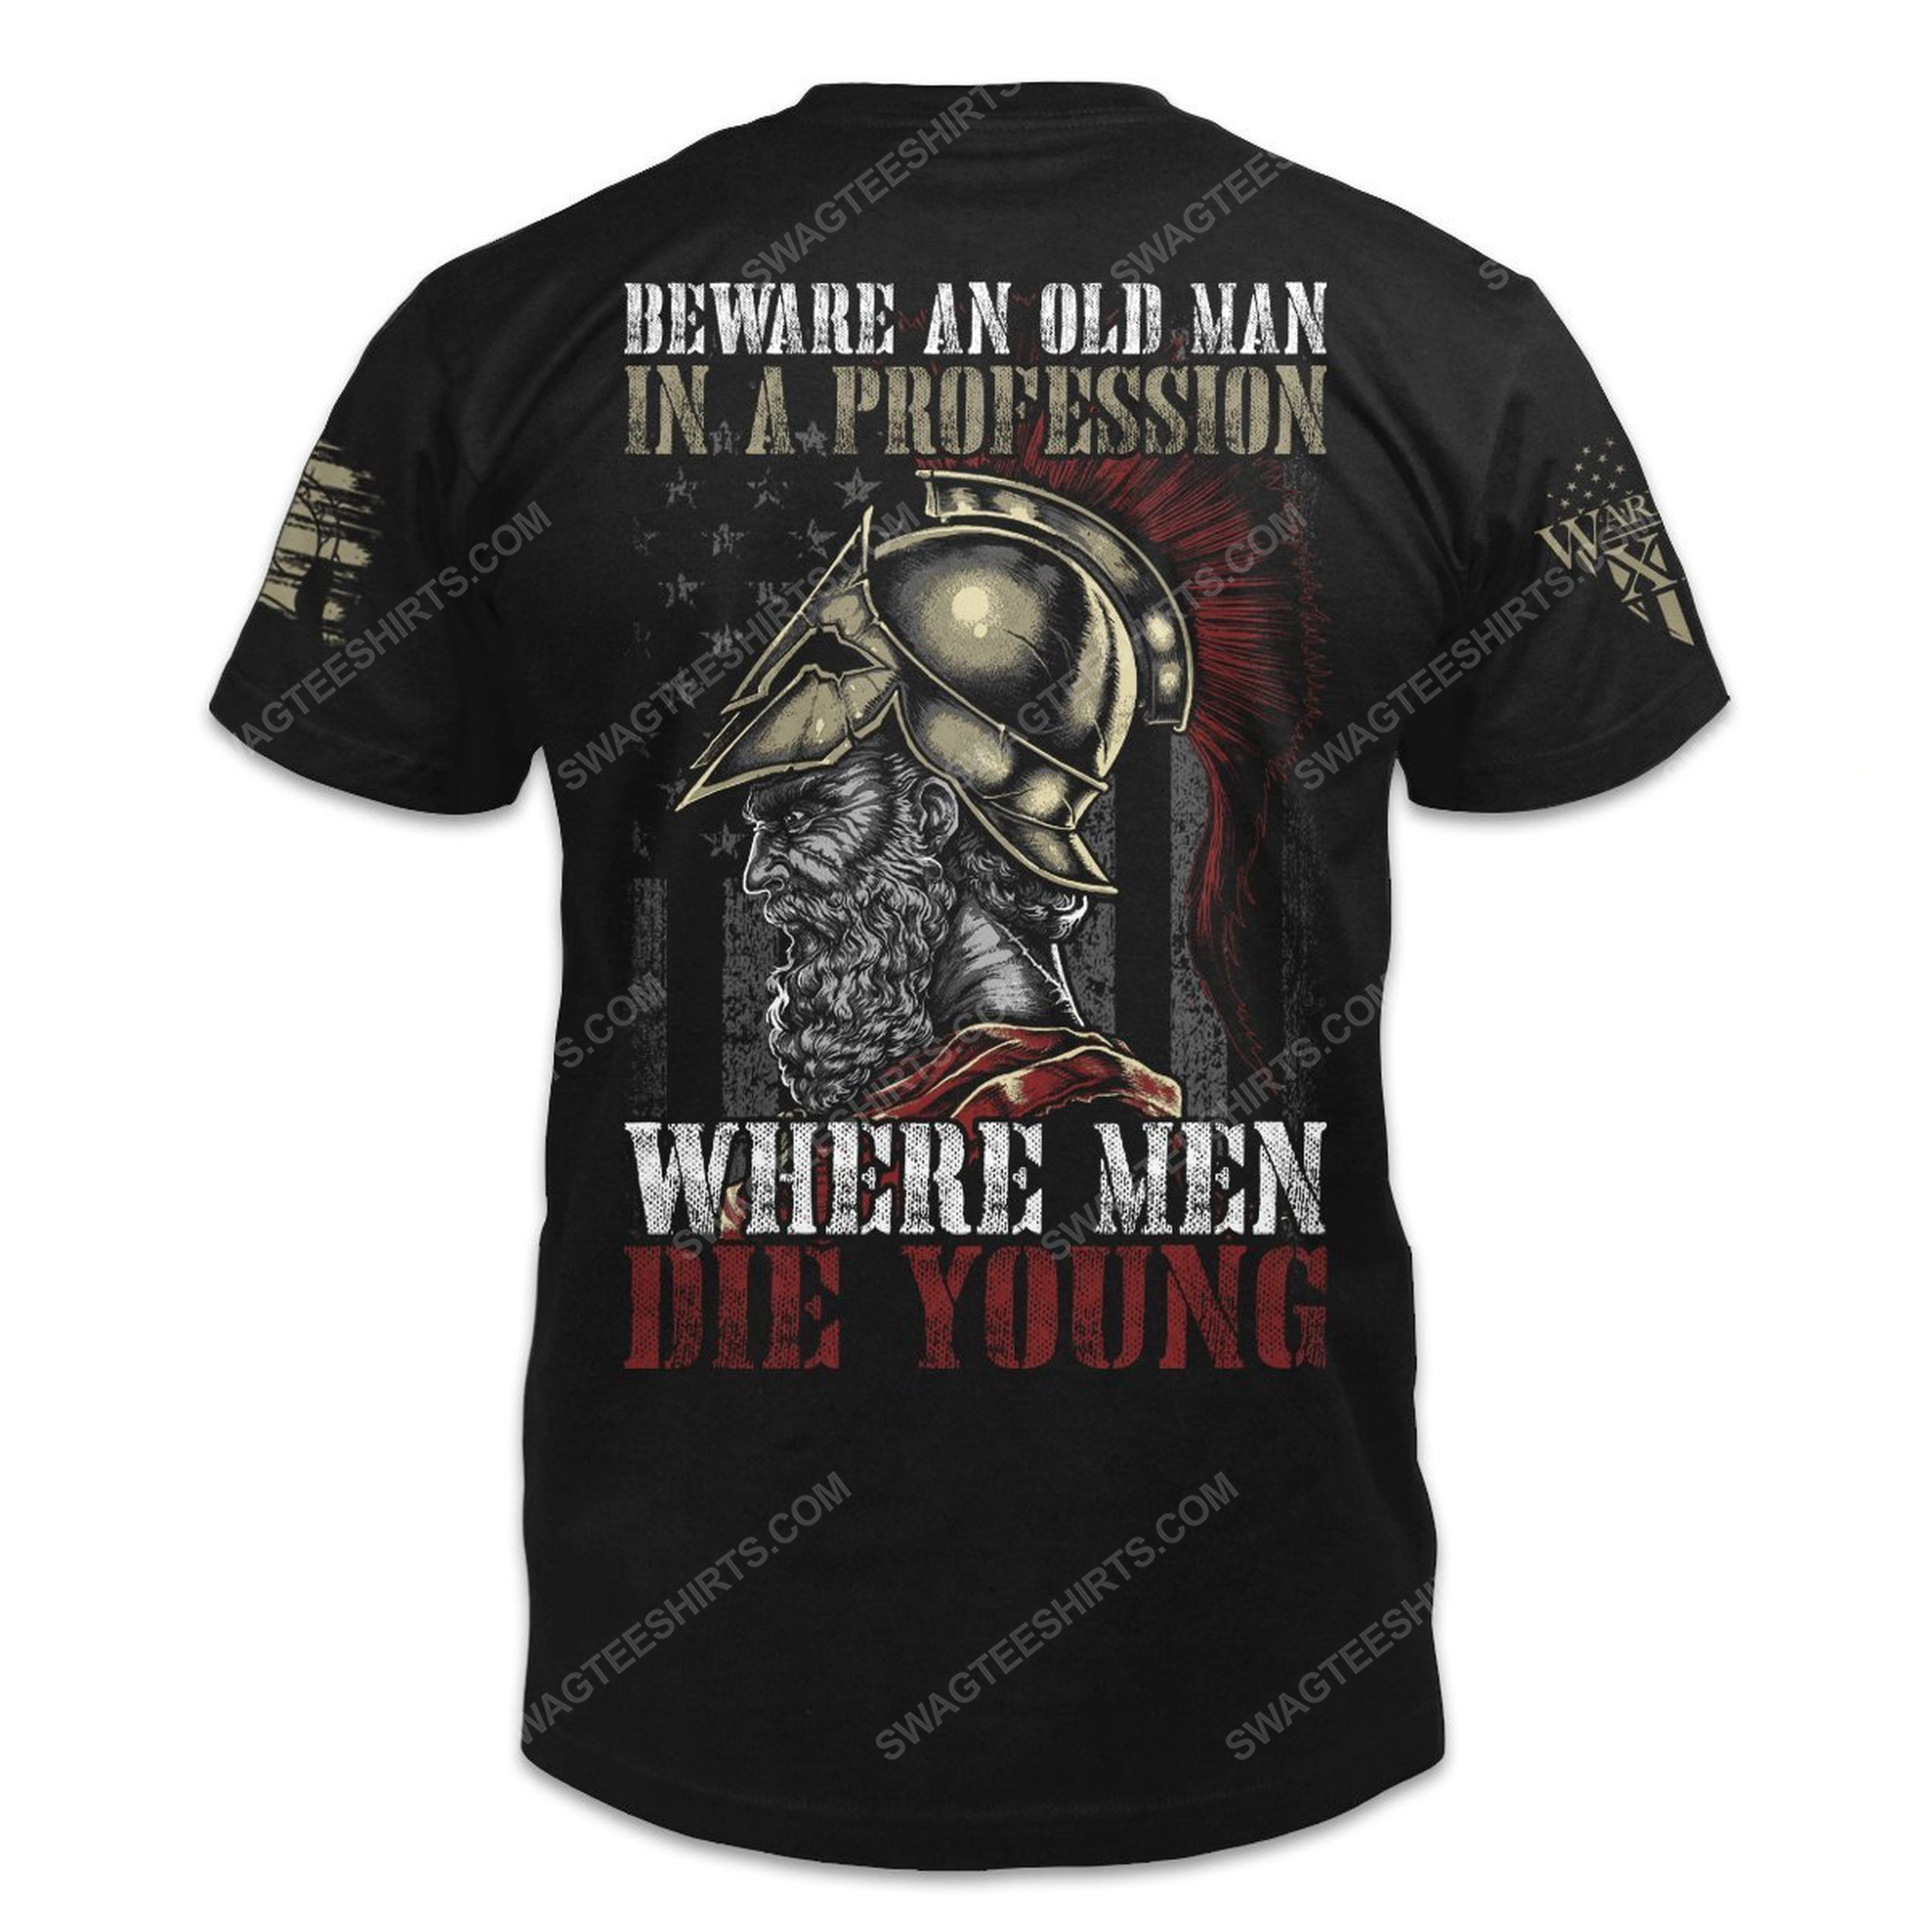 Beware an old man in a profession where men die young shirt 4(1)